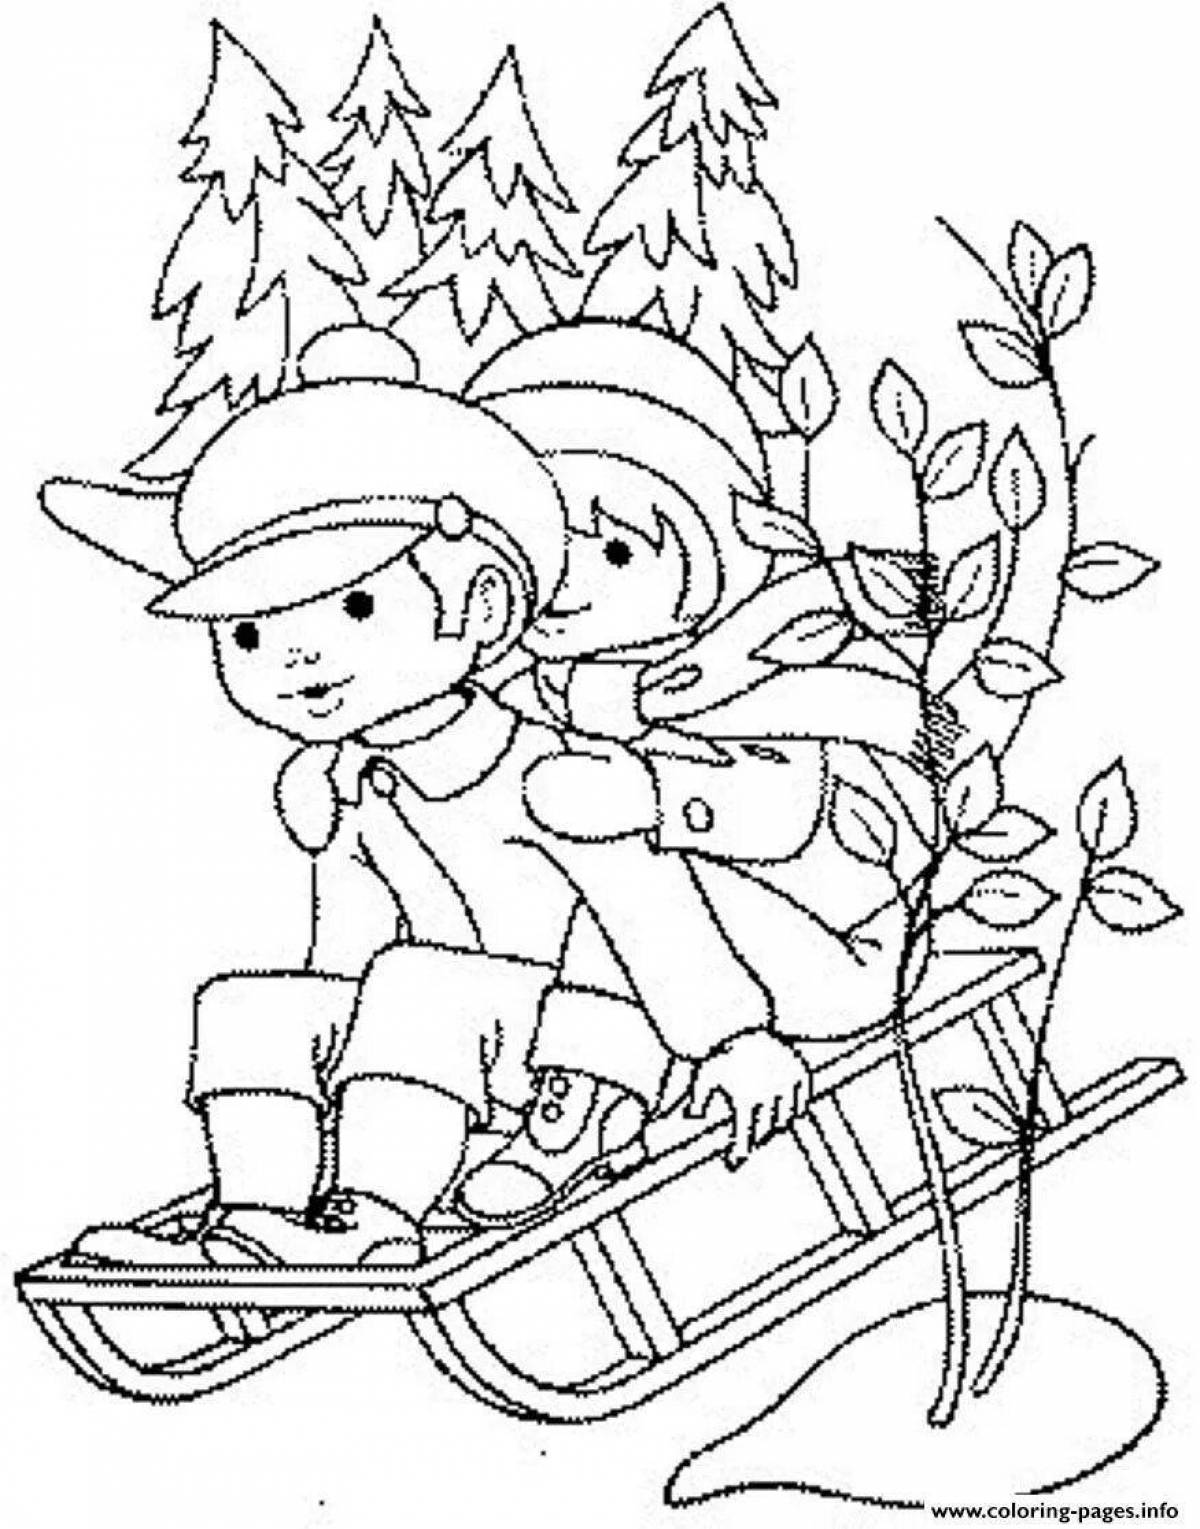 Children's coloring book on a sled